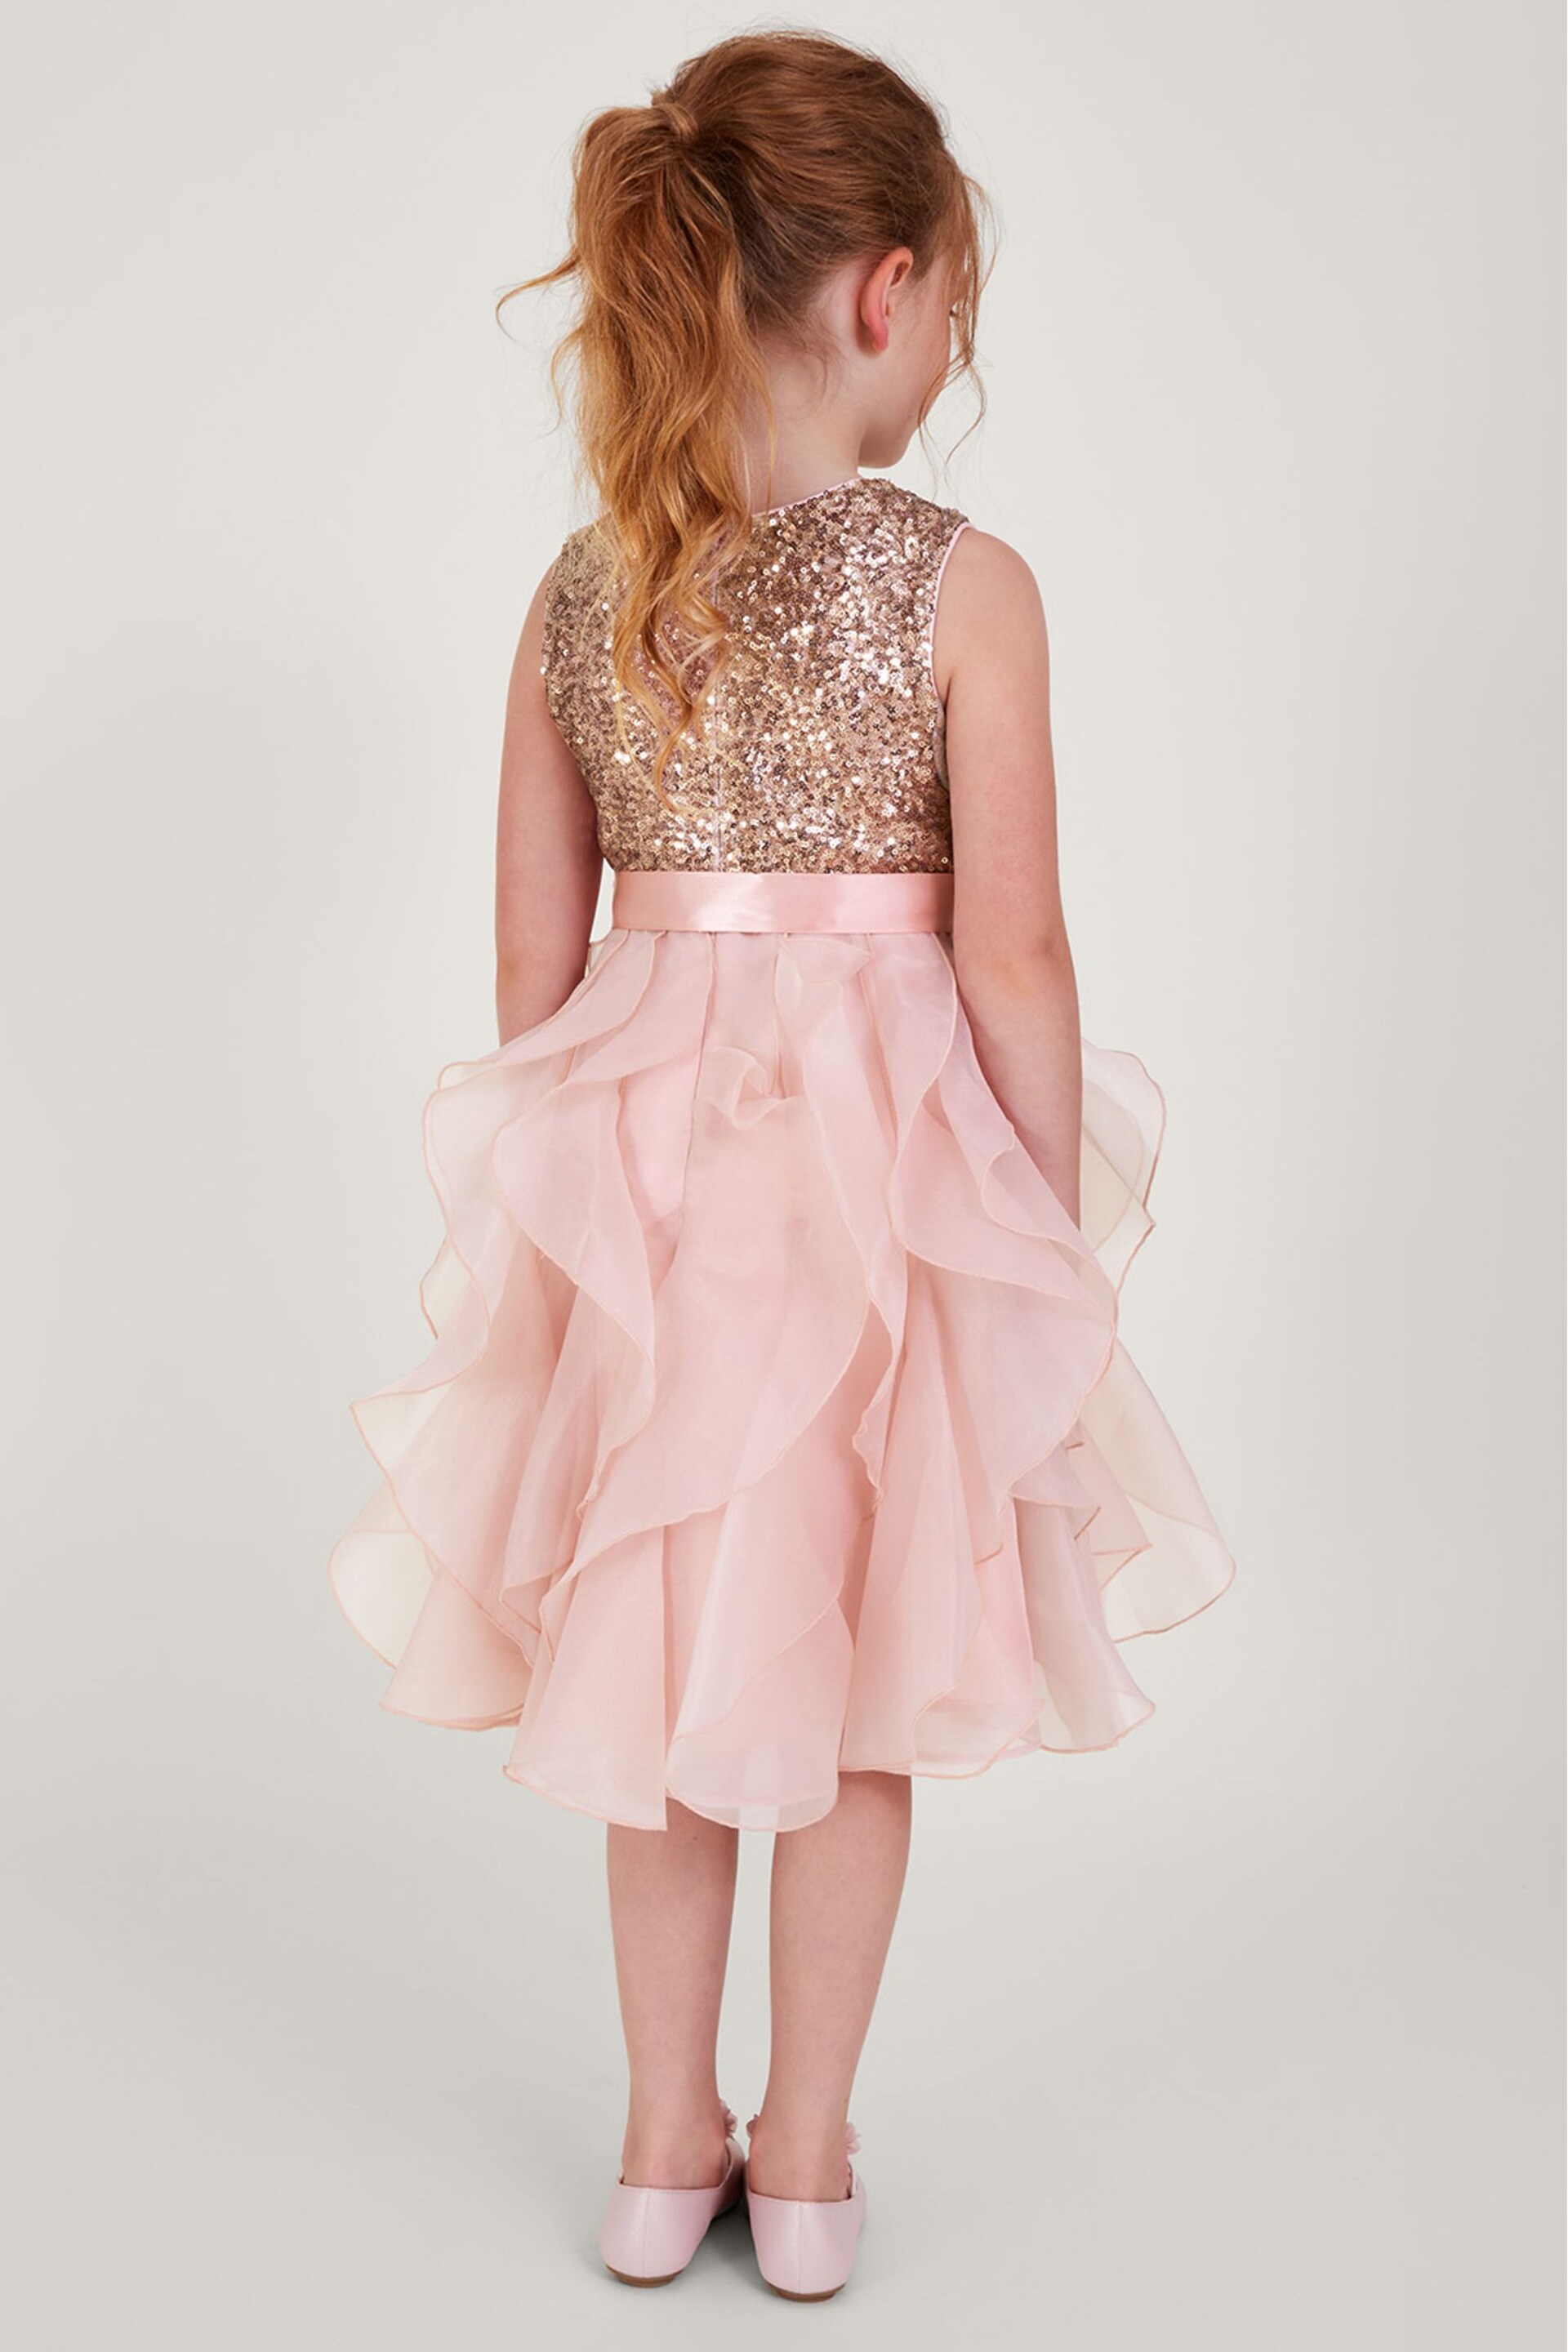 Monsoon Pink Sequin Ruffle Cancan Dress - Image 2 of 5